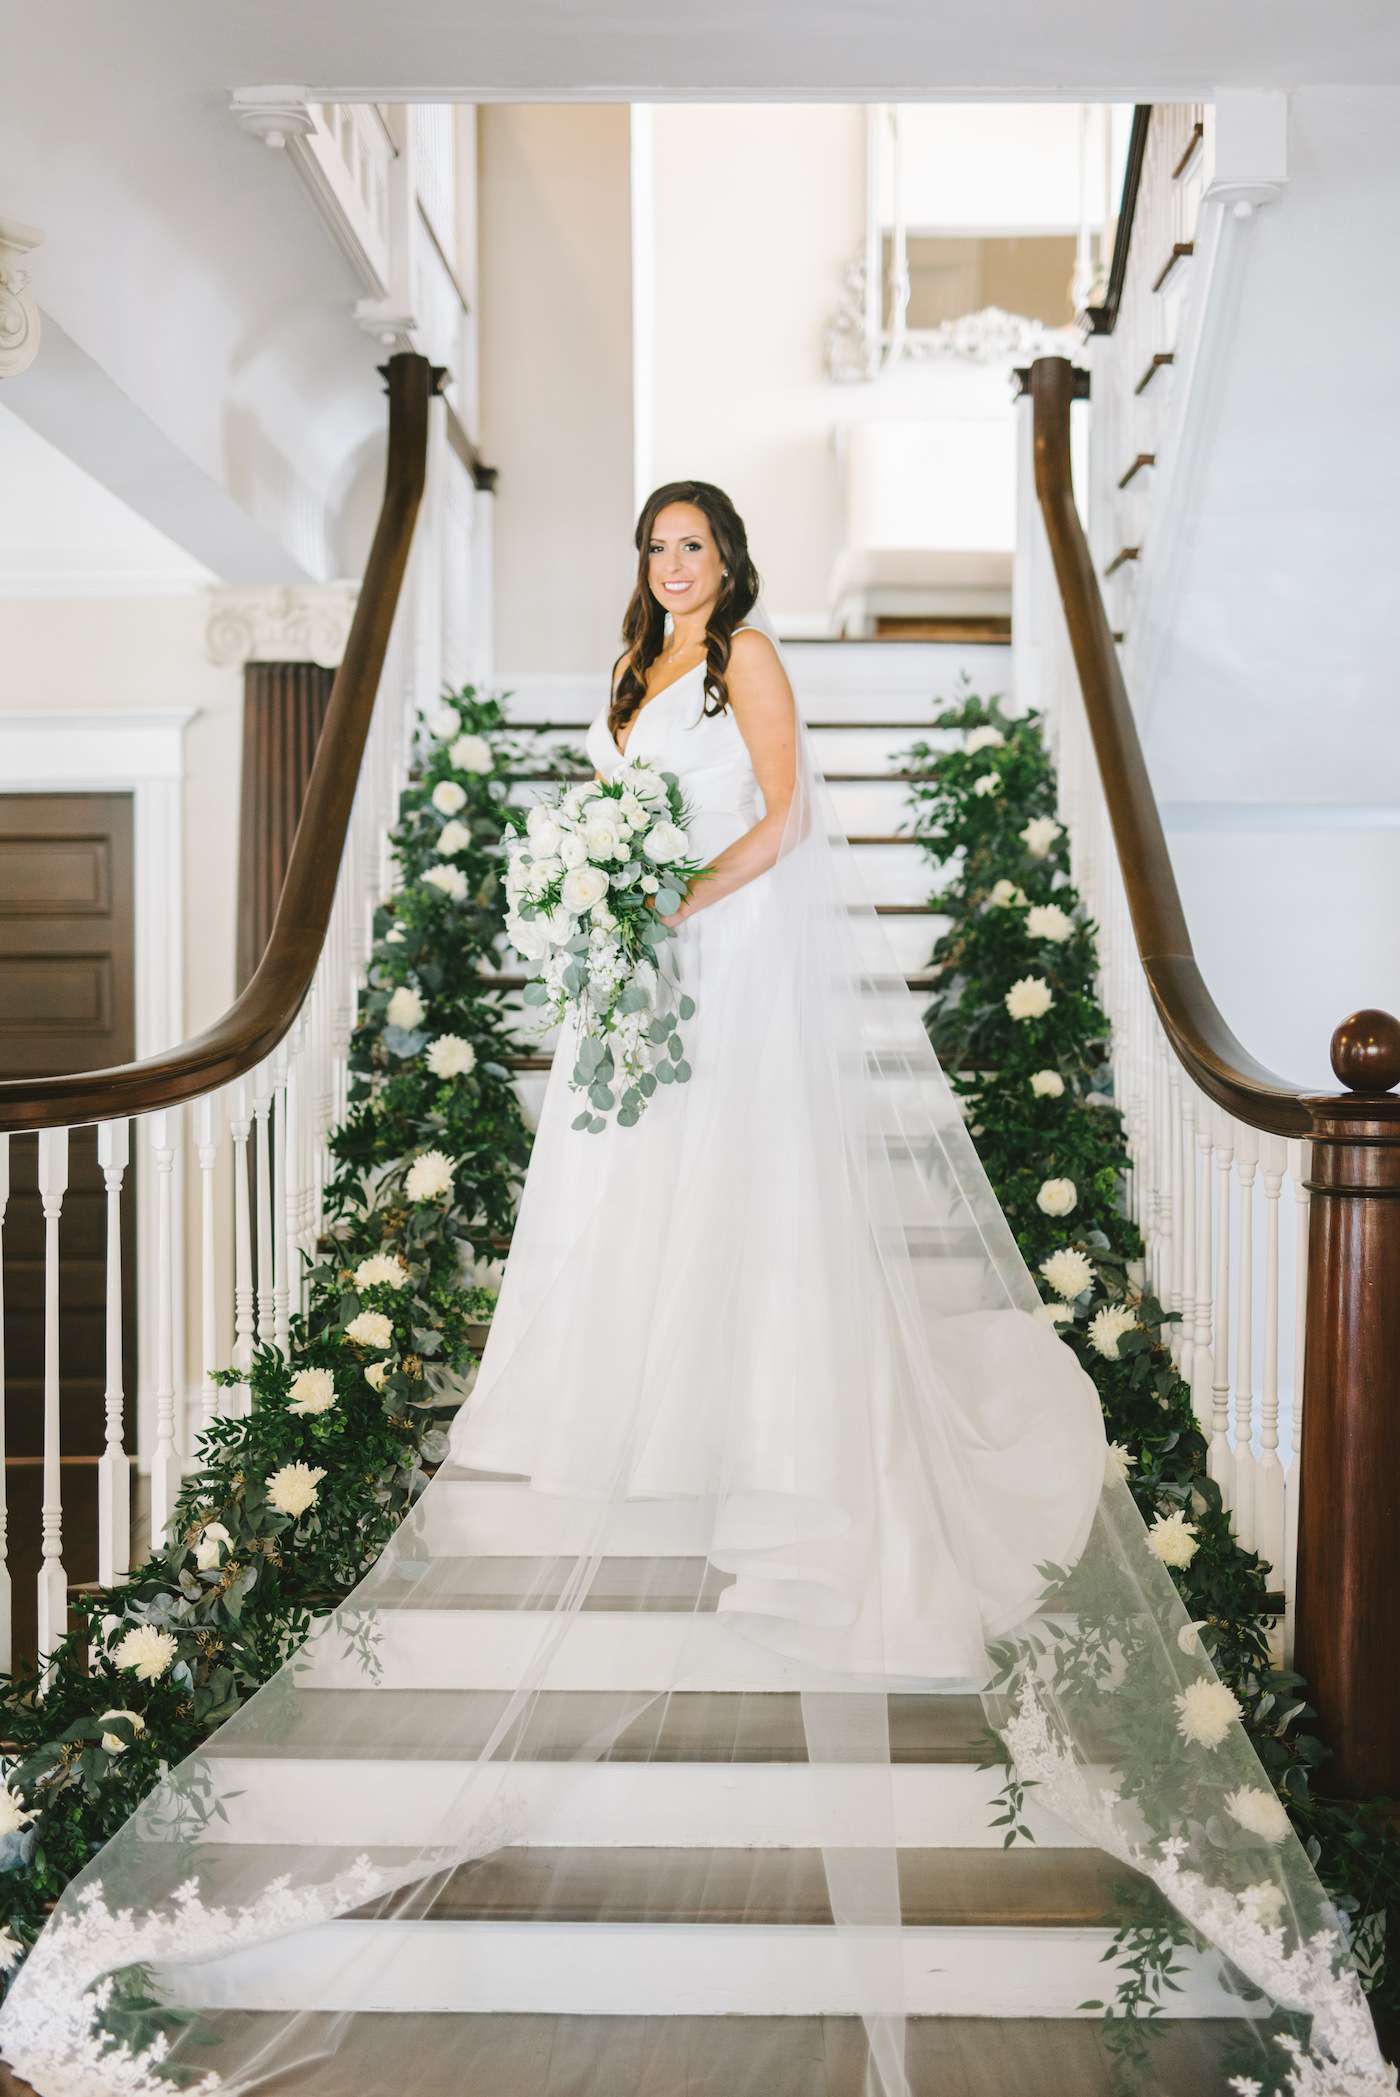 Romantic Classic Bride in A-Line White Wedding Dress and Full Length Romantic Lace Trim Veil on Staircase Holding White Floral and Greenery Bridal Bouquet, Stairs Decorated with Lush Flowers | Tampa Bay Wedding Photographer Kera Photography | Tampa Bay Wedding Planner Breezin' Weddings | Historic Wedding Venue The Orlo